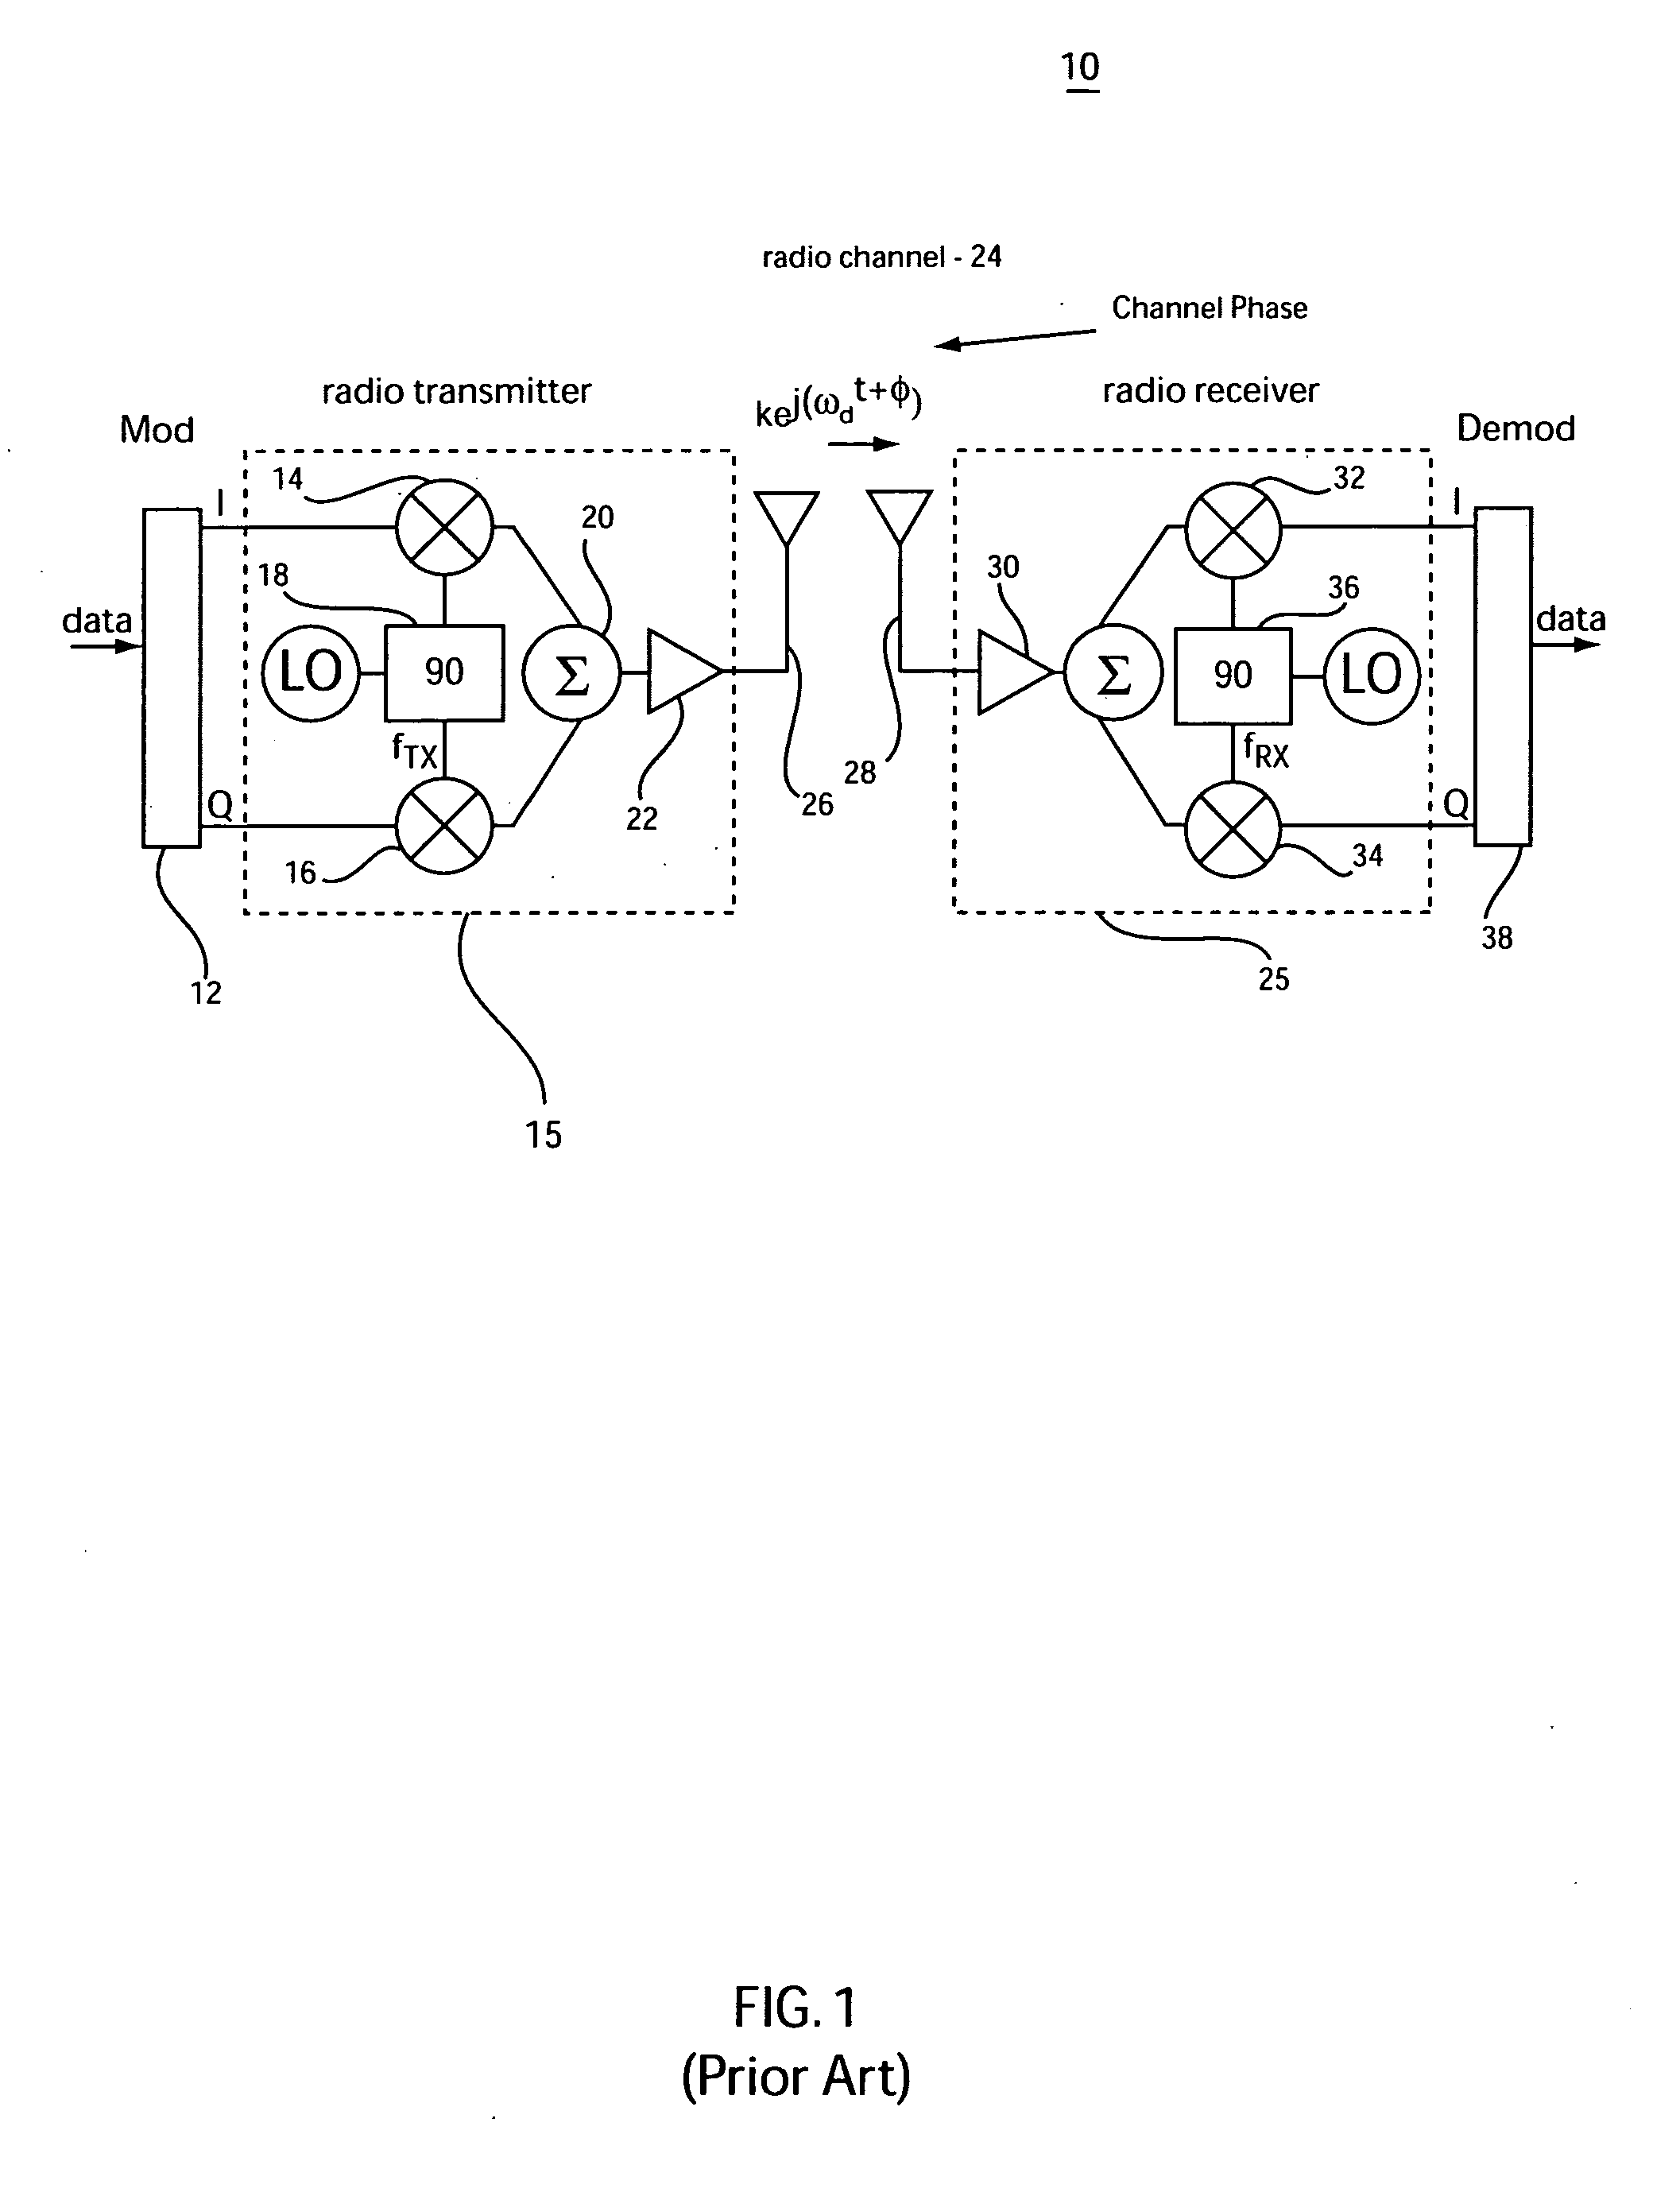 Apparatus and method for signal phase control in an integrated radio circuit